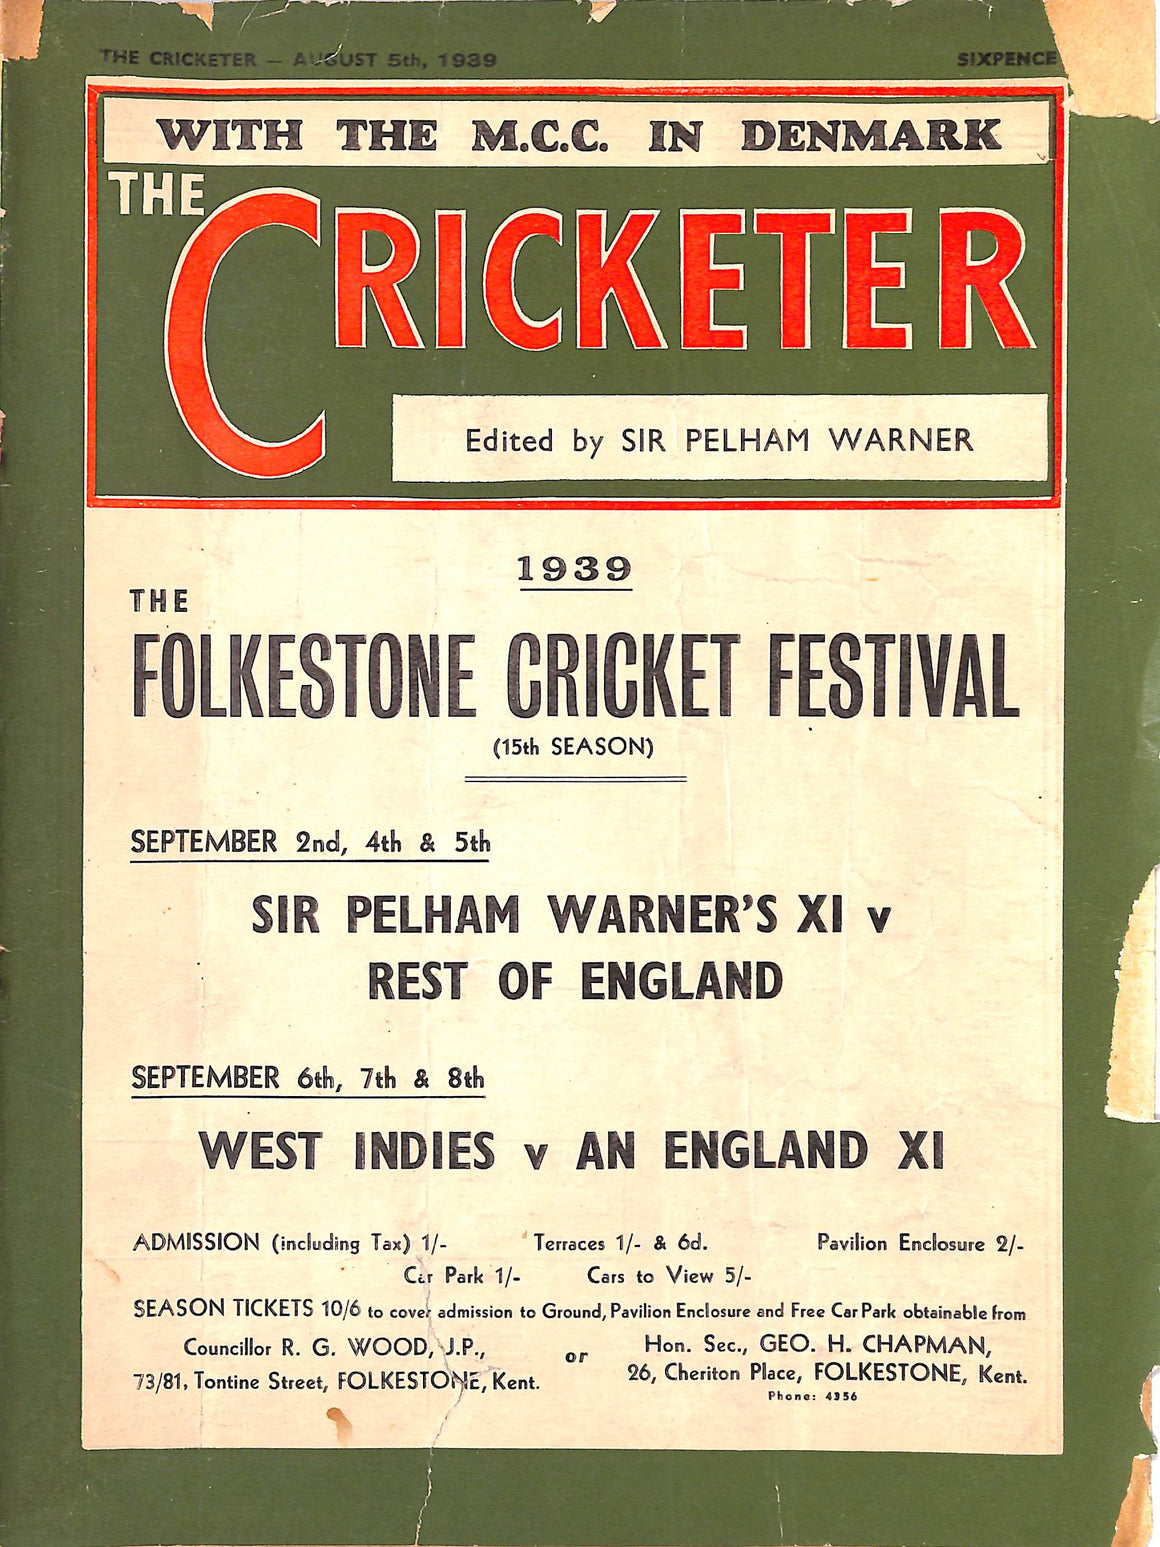 The Cricketer - August 5th, 1939